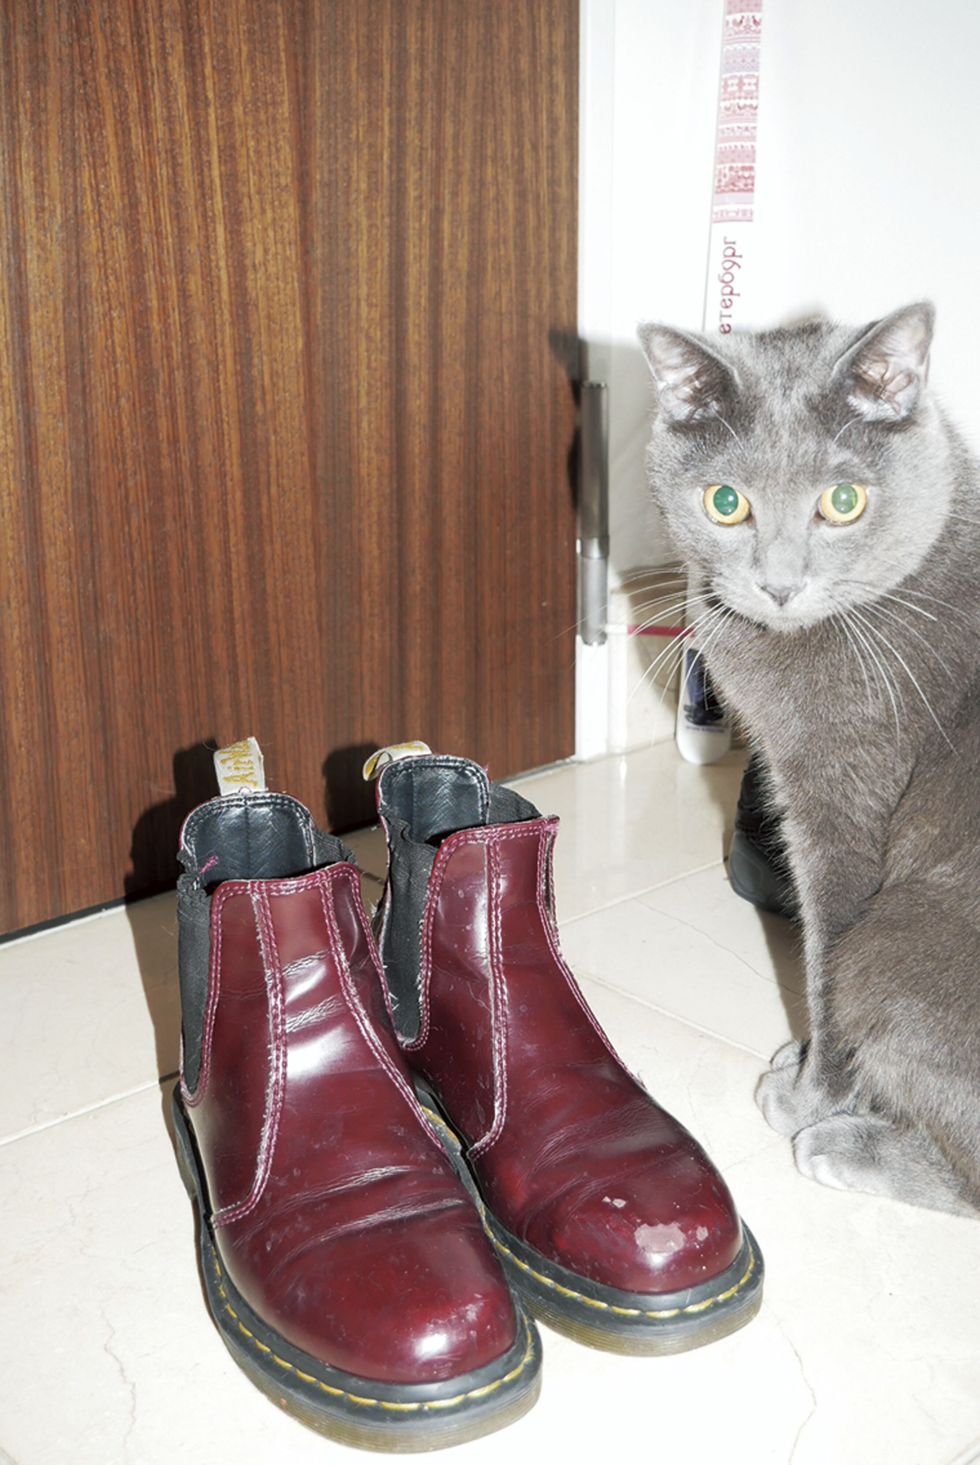 Shoe, Carnivore, Felidae, Small to medium-sized cats, Cat, Whiskers, Boot, Carmine, Grey, Liver, 